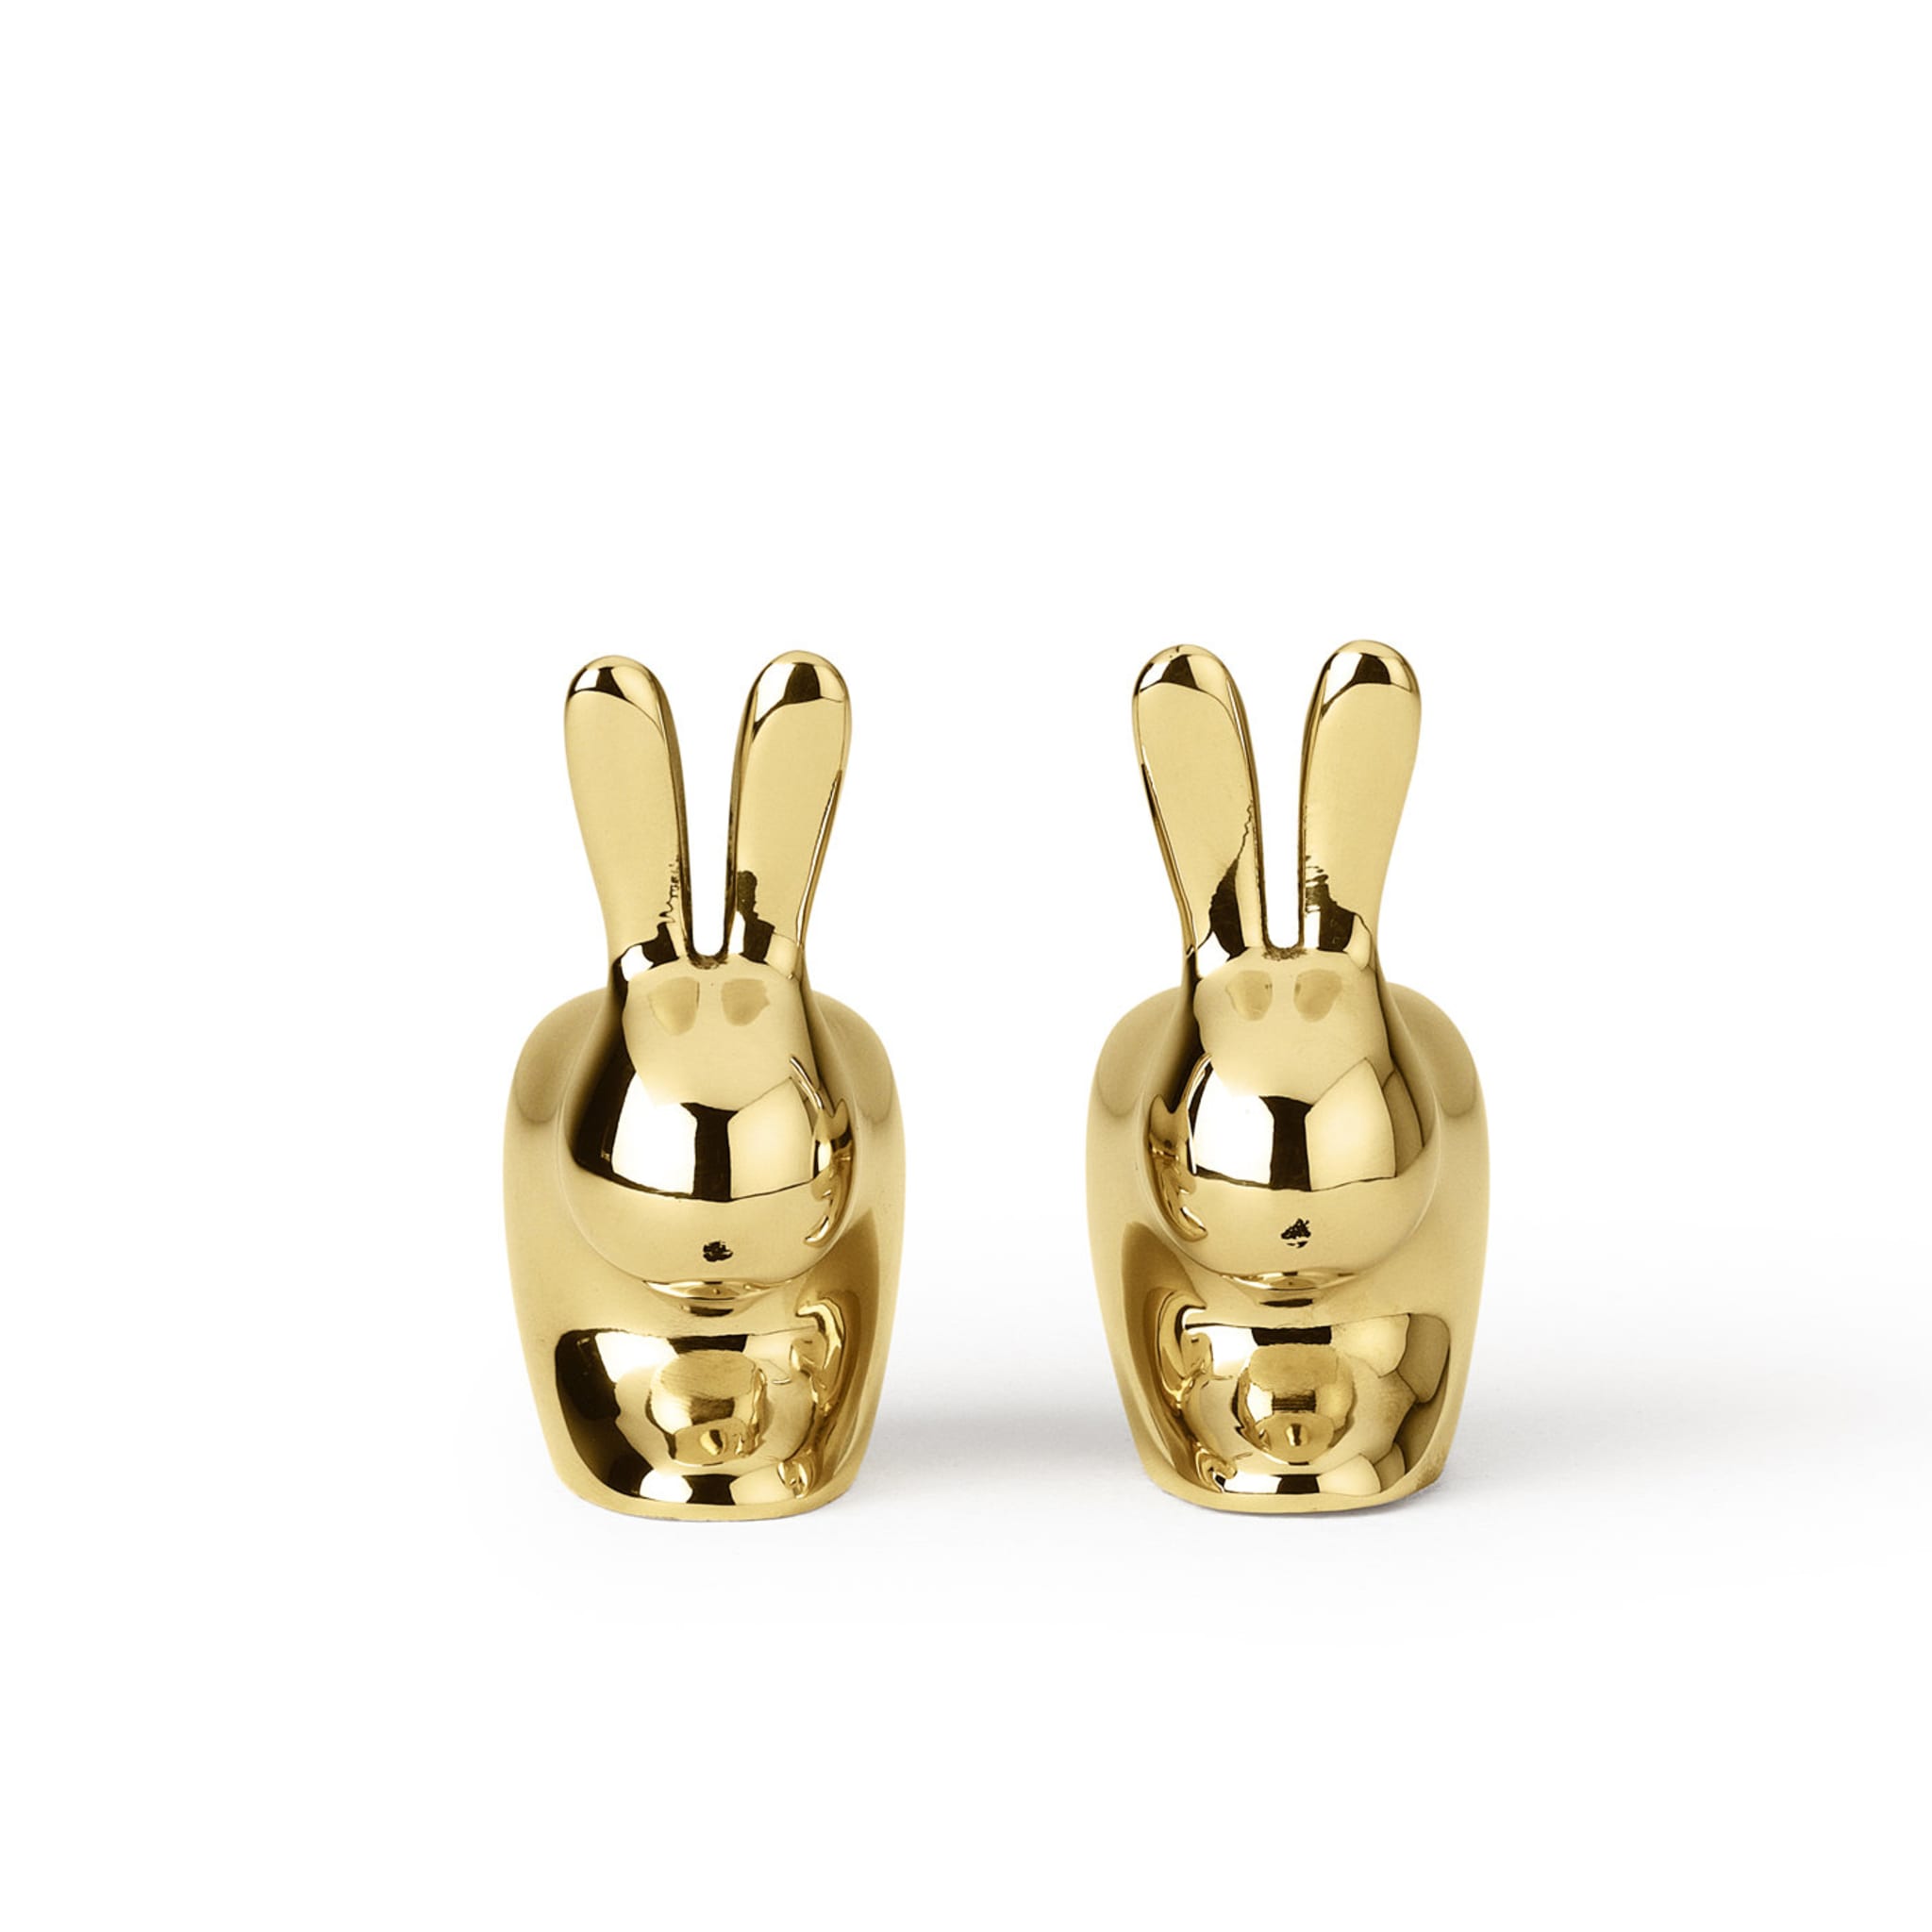 Rabbit Salt and Pepper Shaker in Brass Finish By Stefano Giovannoni - Alternative view 1